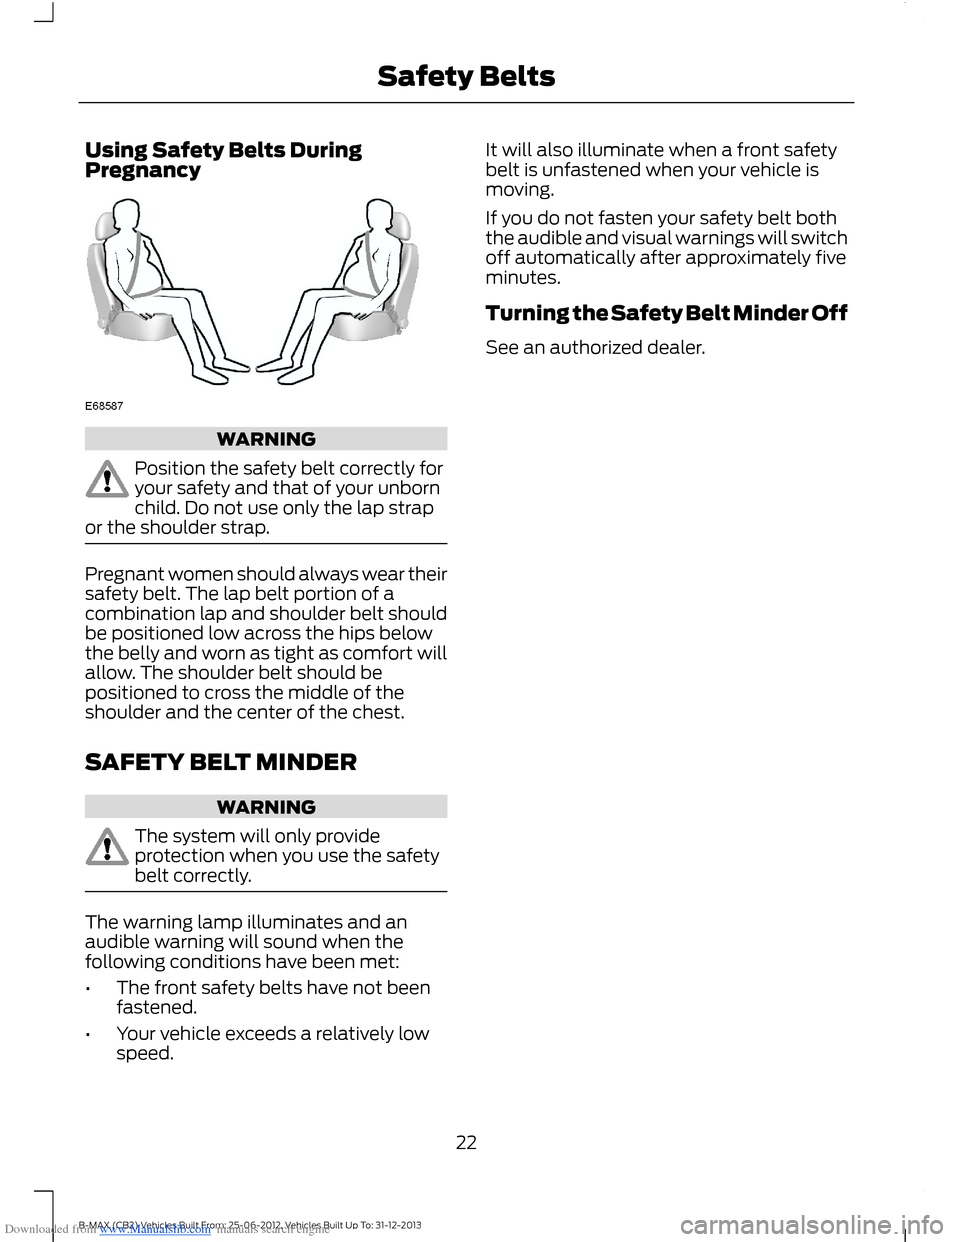 FORD B MAX 2013 1.G Owners Manual Downloaded from www.Manualslib.com manuals search engine Using Safety Belts DuringPregnancy
WARNING
Position the safety belt correctly foryour safety and that of your unbornchild. Do not use only the 